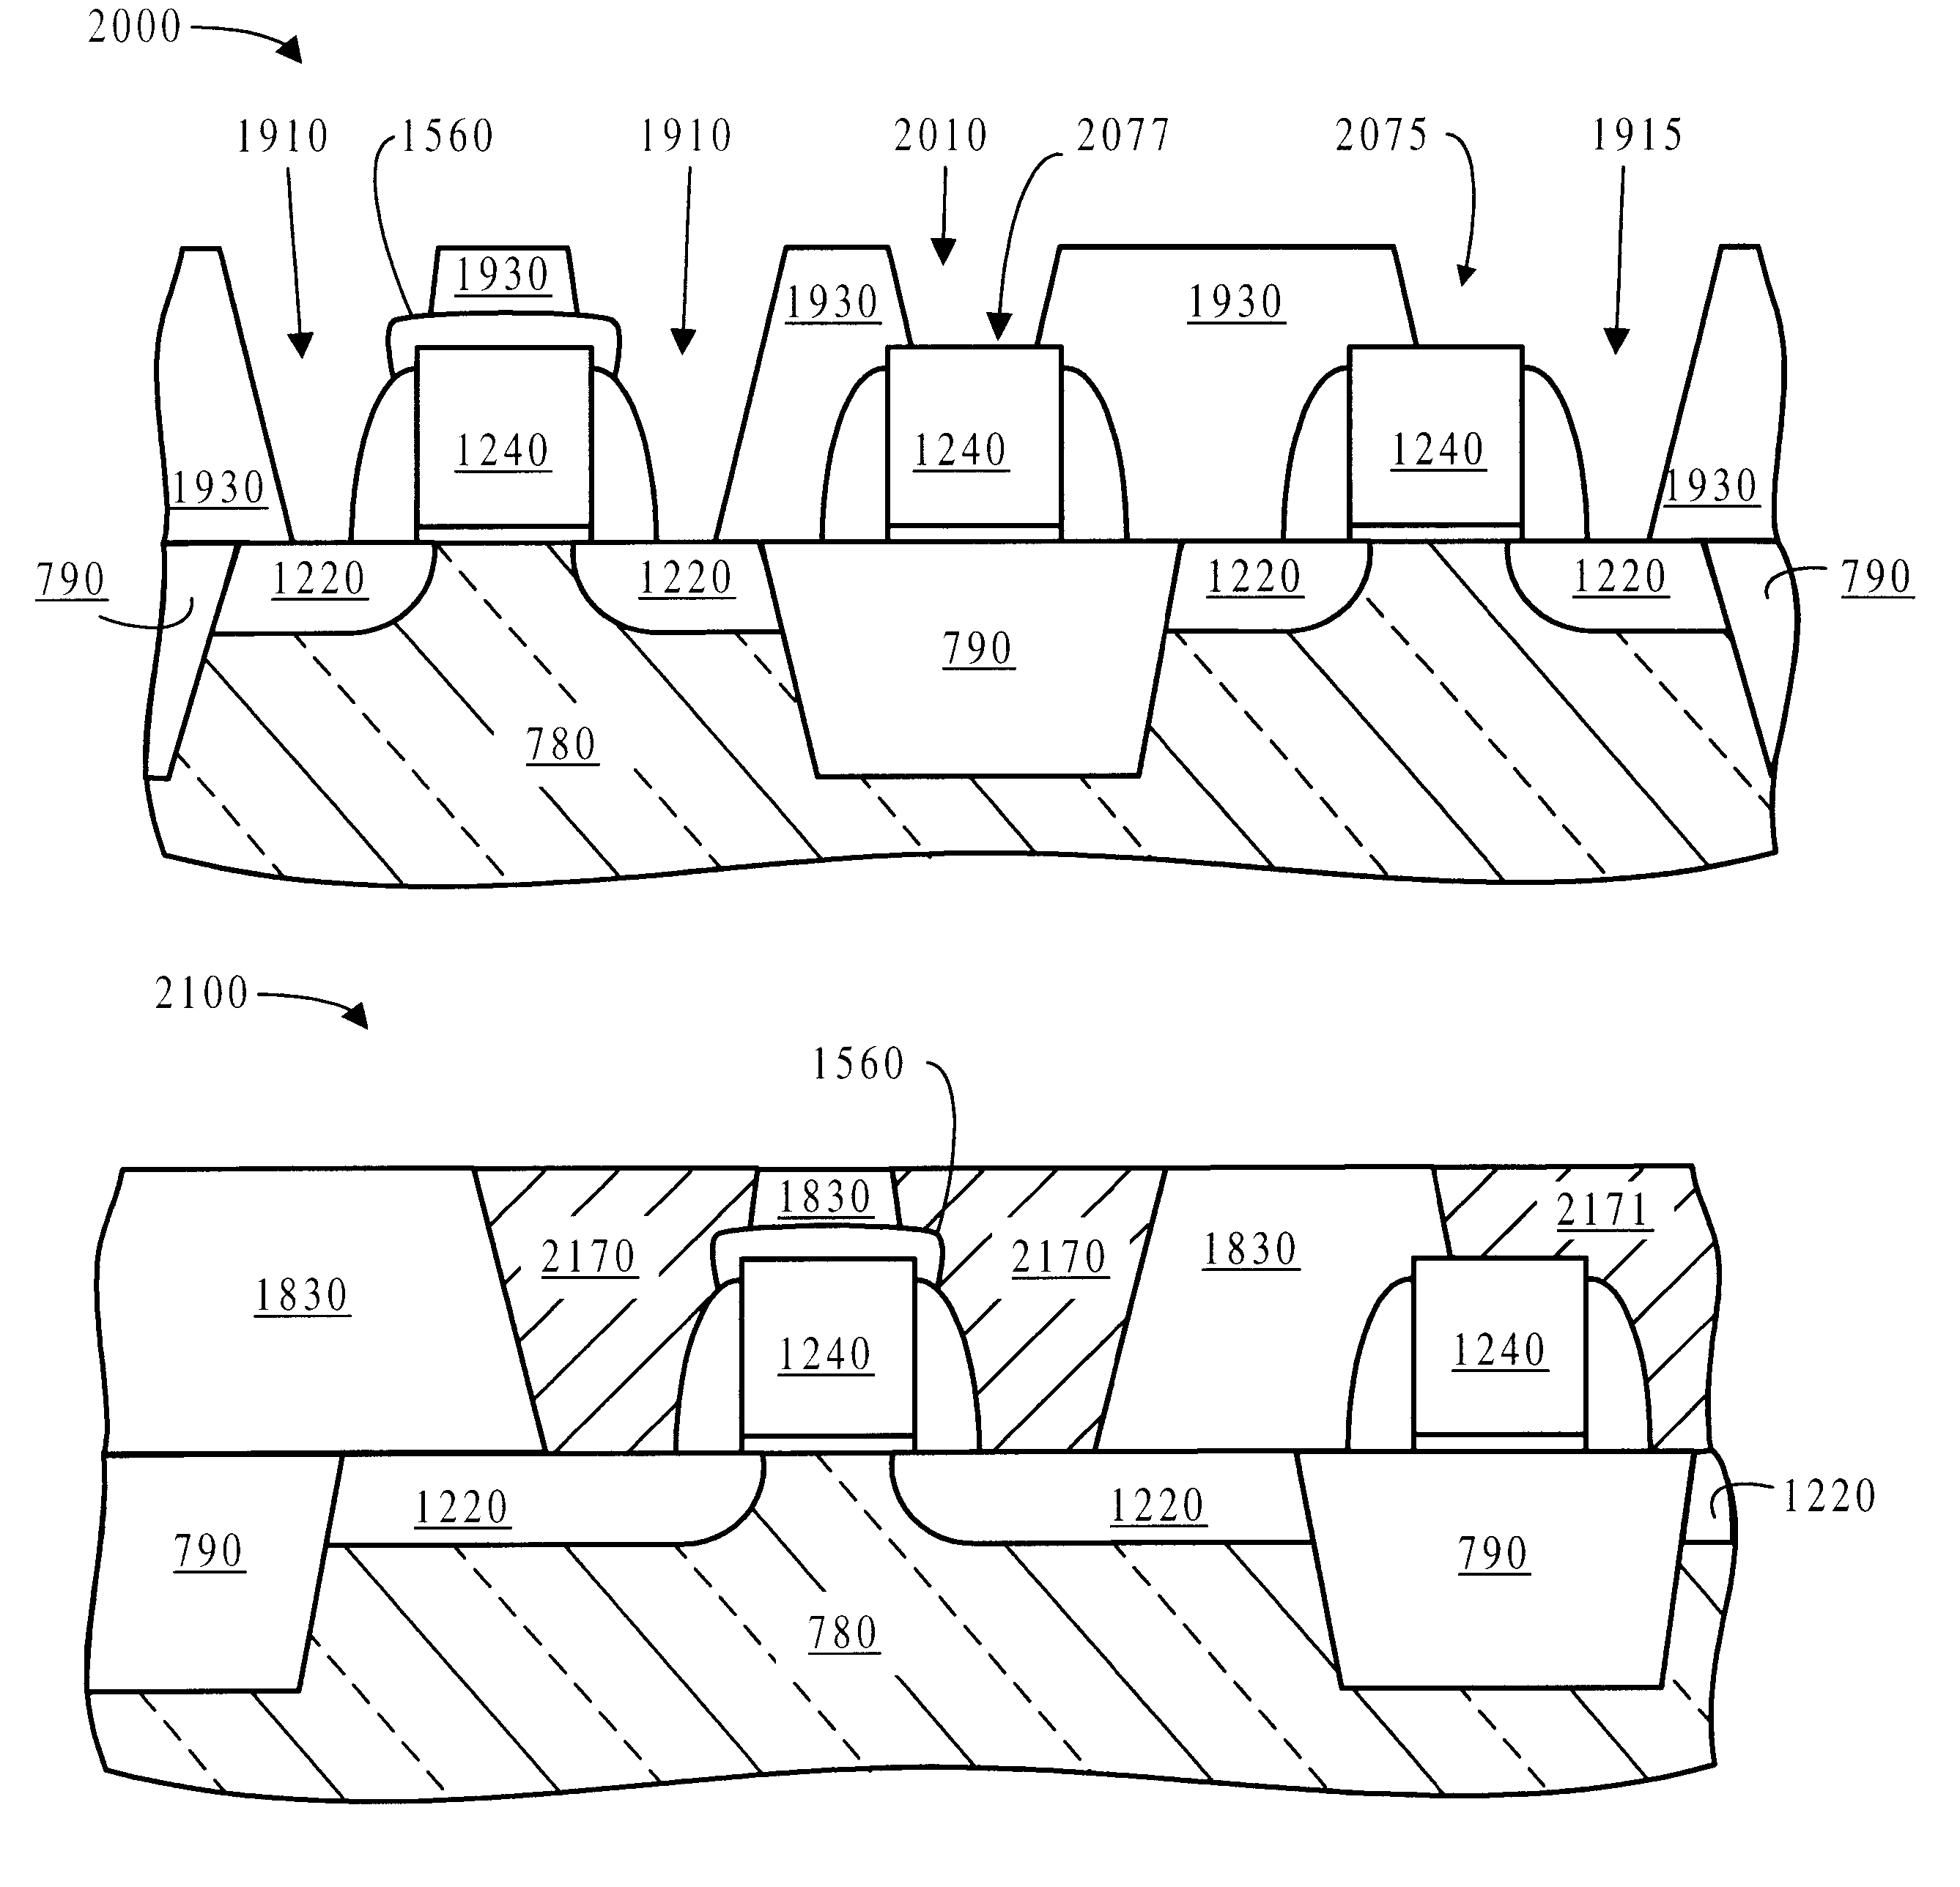 Method for forming borderless gate structures and apparatus formed thereby